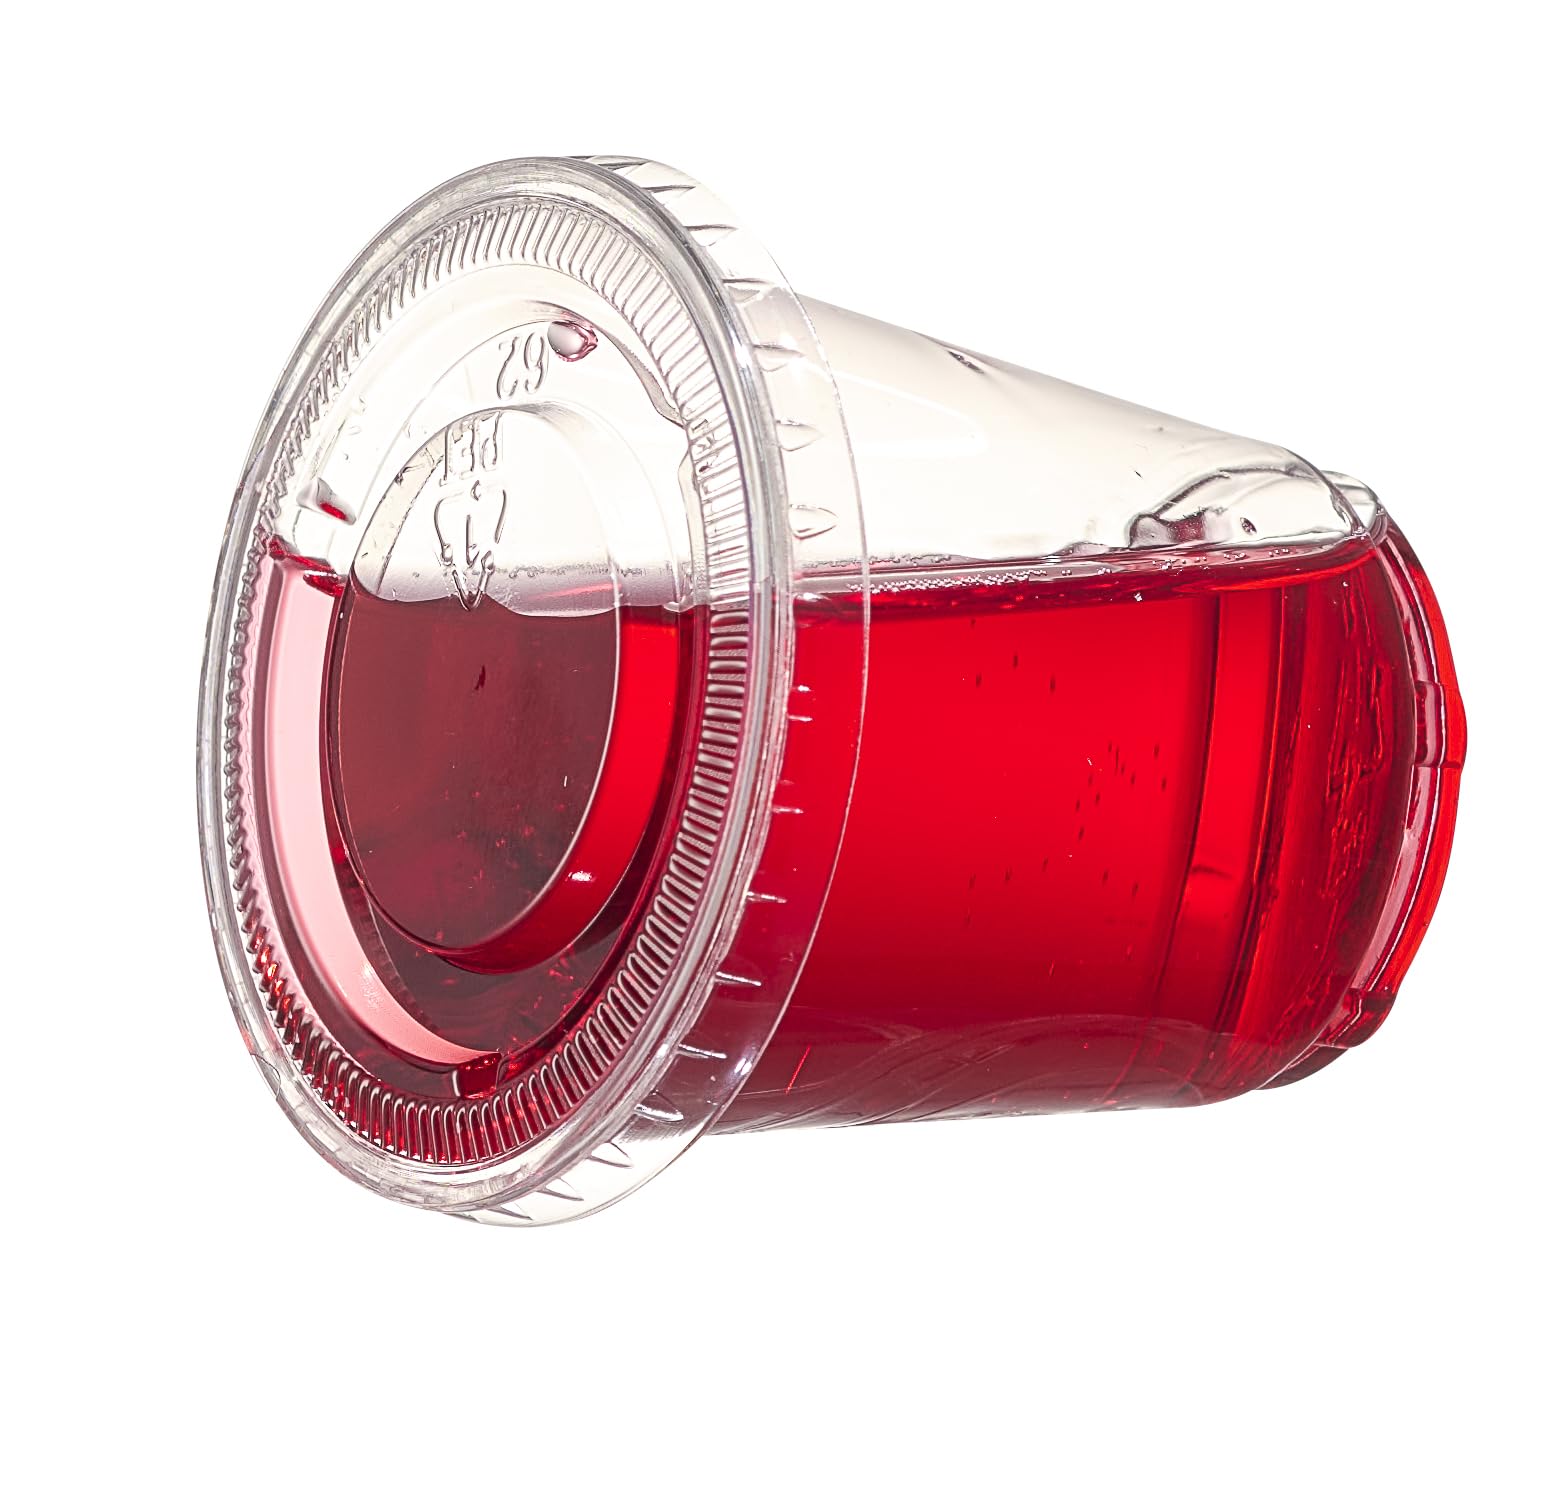 PATCHKE [ 3 OZ - 100 Cups + 100 Lids ] Jello shot Cups with Lids - Leak-Resistant, Tight fit, Easy Snap-on Lids - Clear & Fully Transparent, Tall squeezable Disposable Plastic.